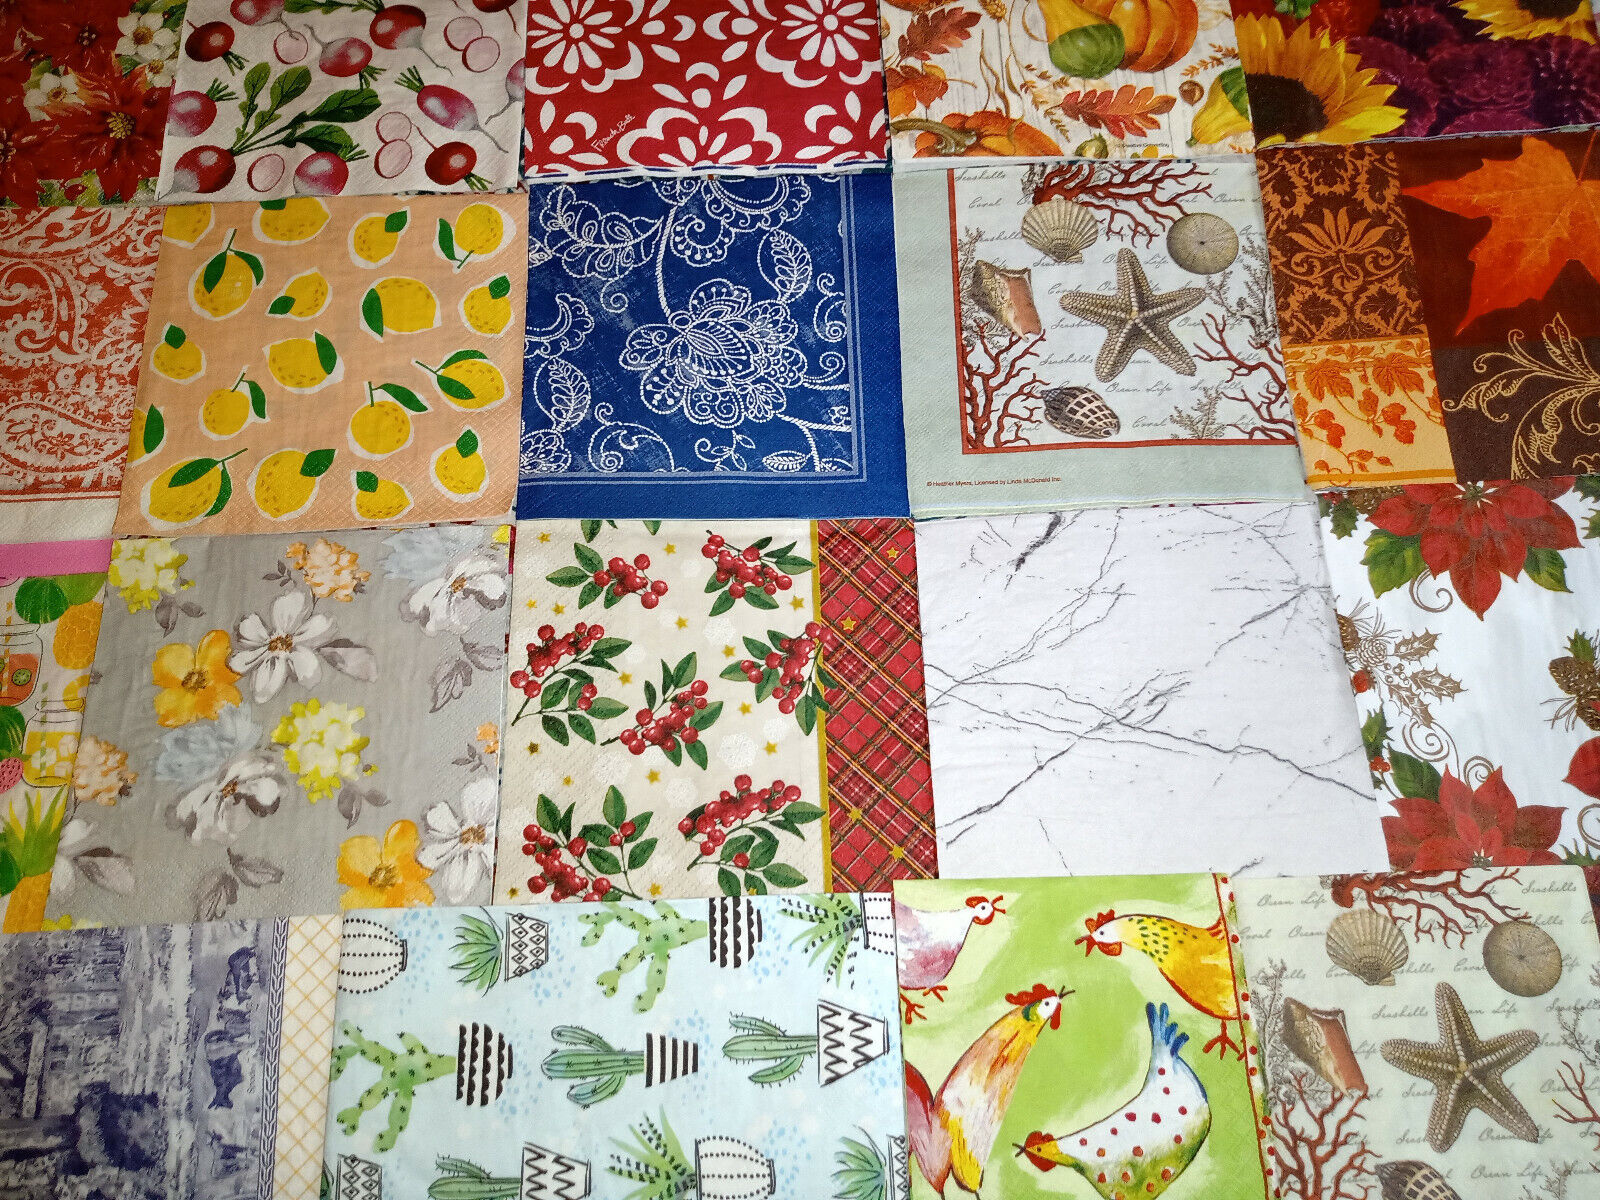 38 FLORAL & NATURE ALL OVER PATTERNS ~ LOT SET MIXED Paper Napkins ~ Decoupage Без бренда - фотография #5